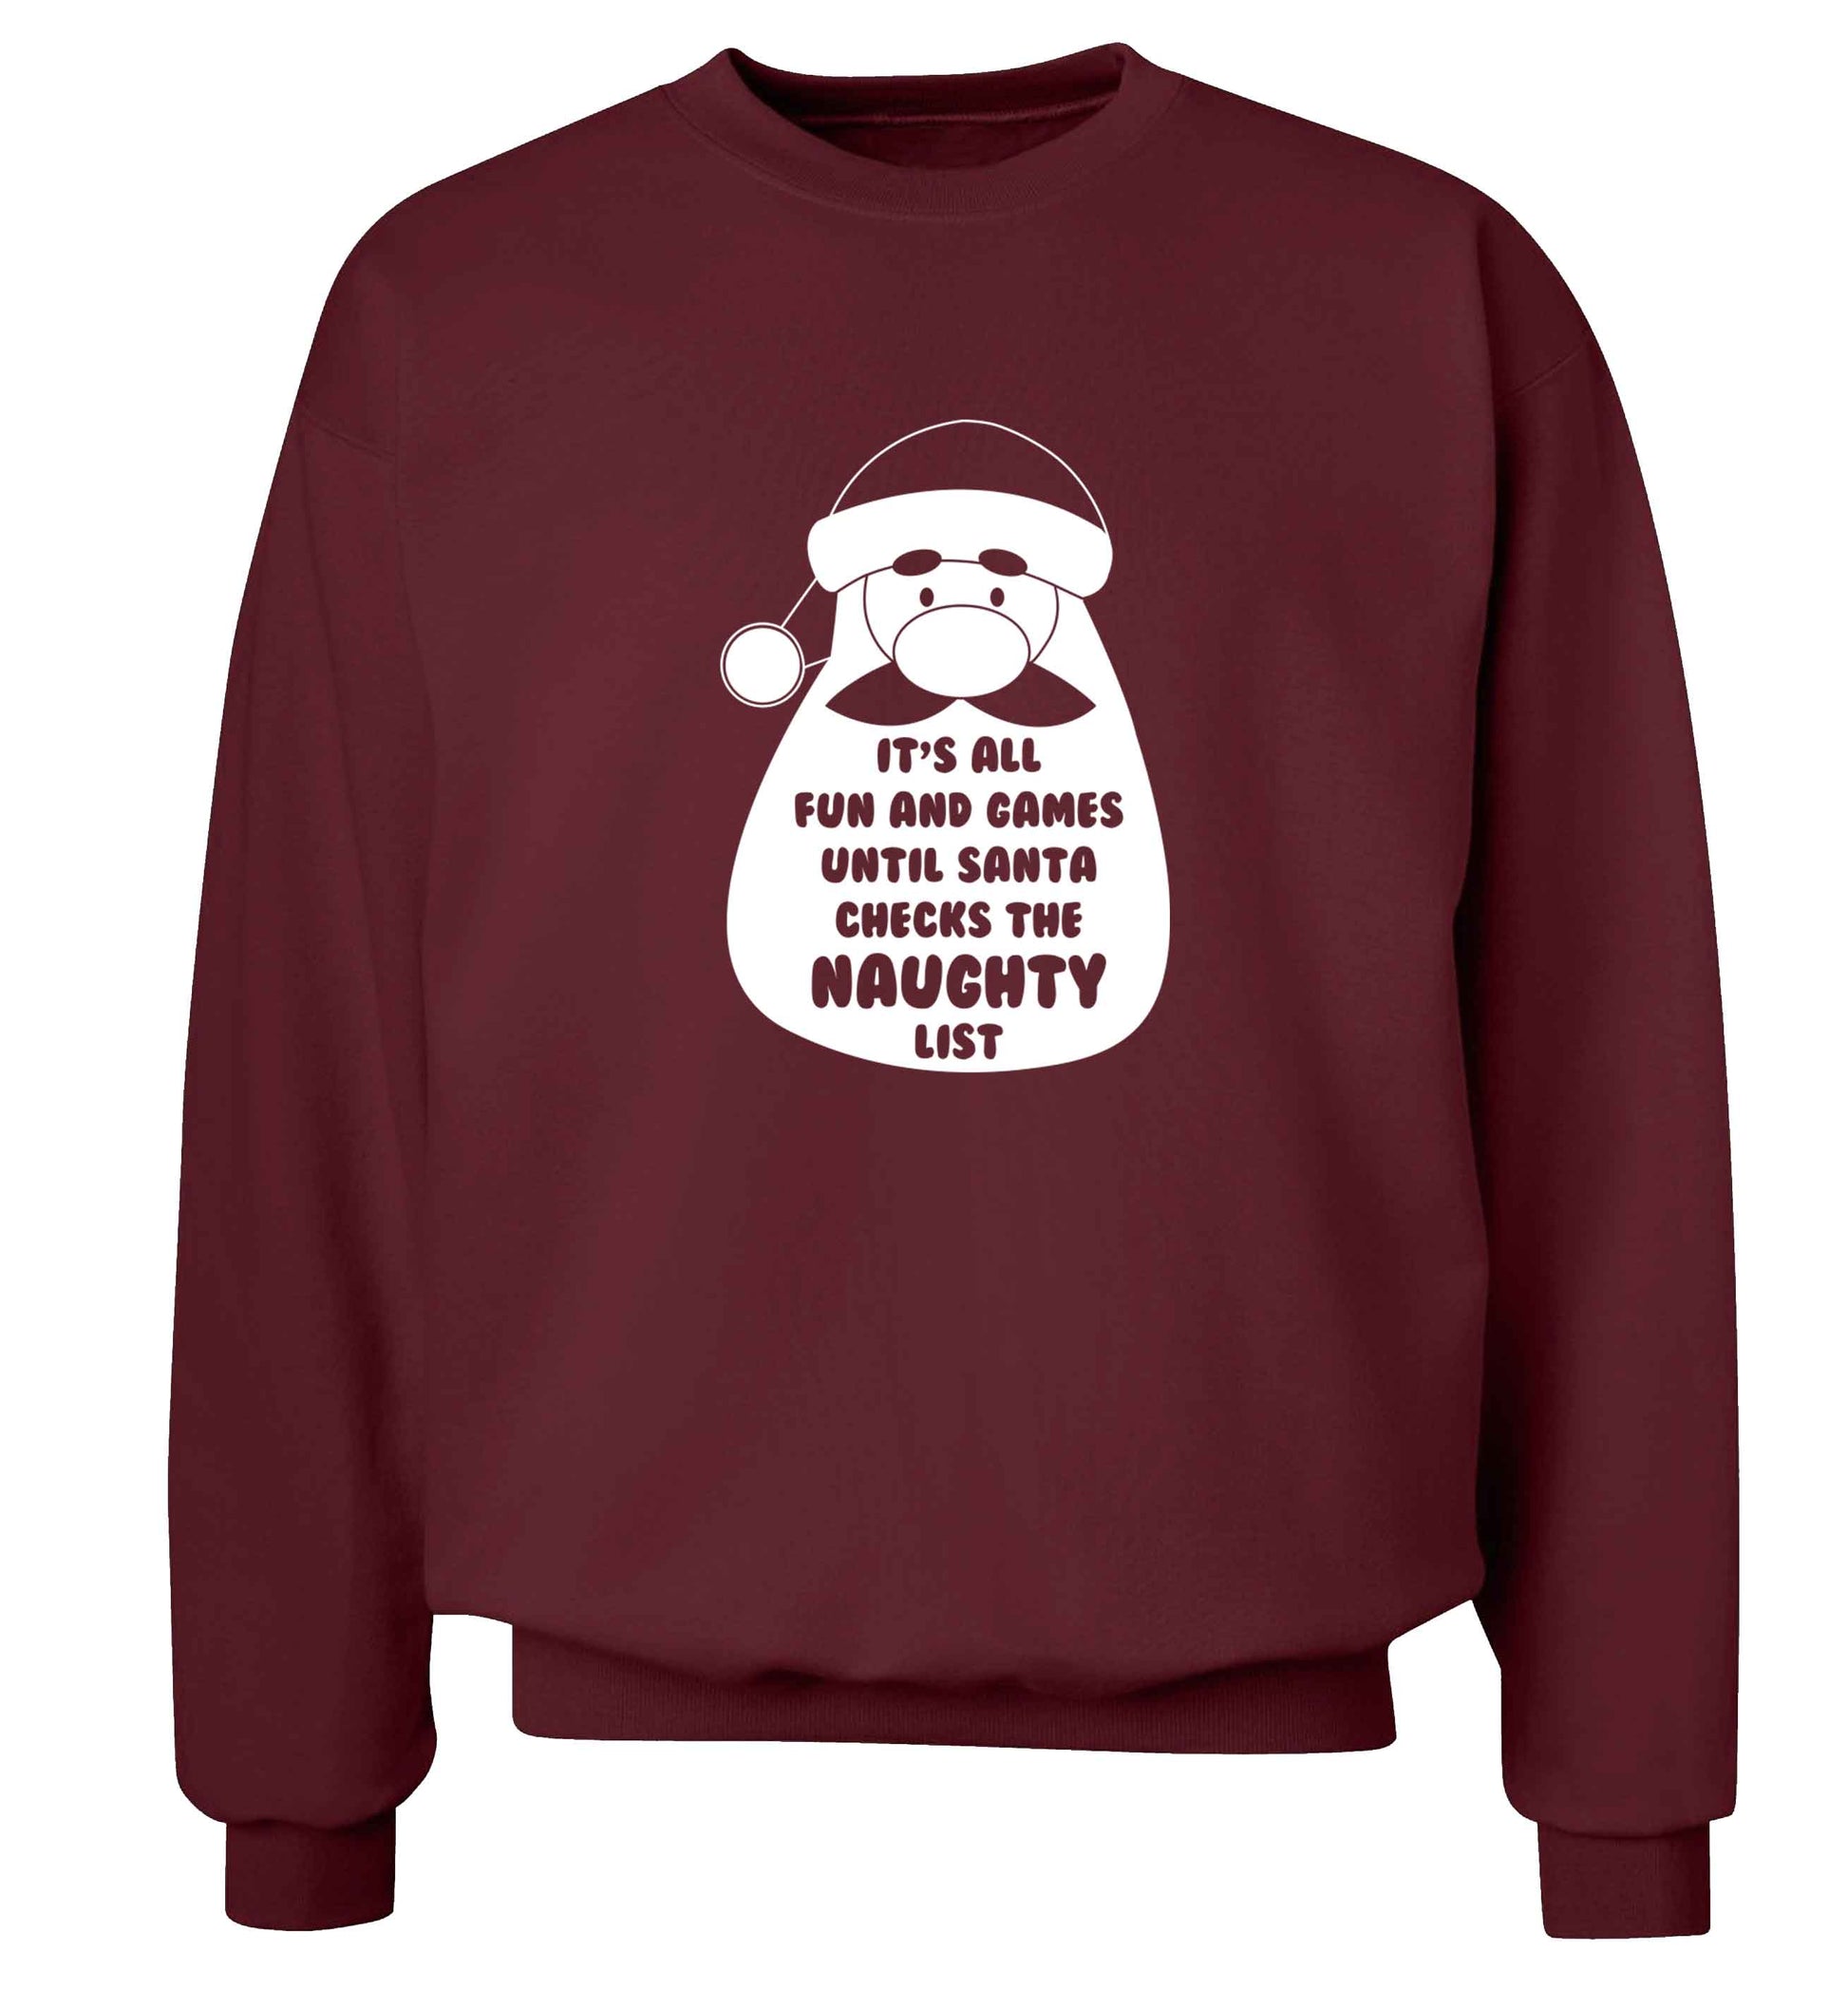 It's all fun and games until Santa checks the naughty list adult's unisex maroon sweater 2XL